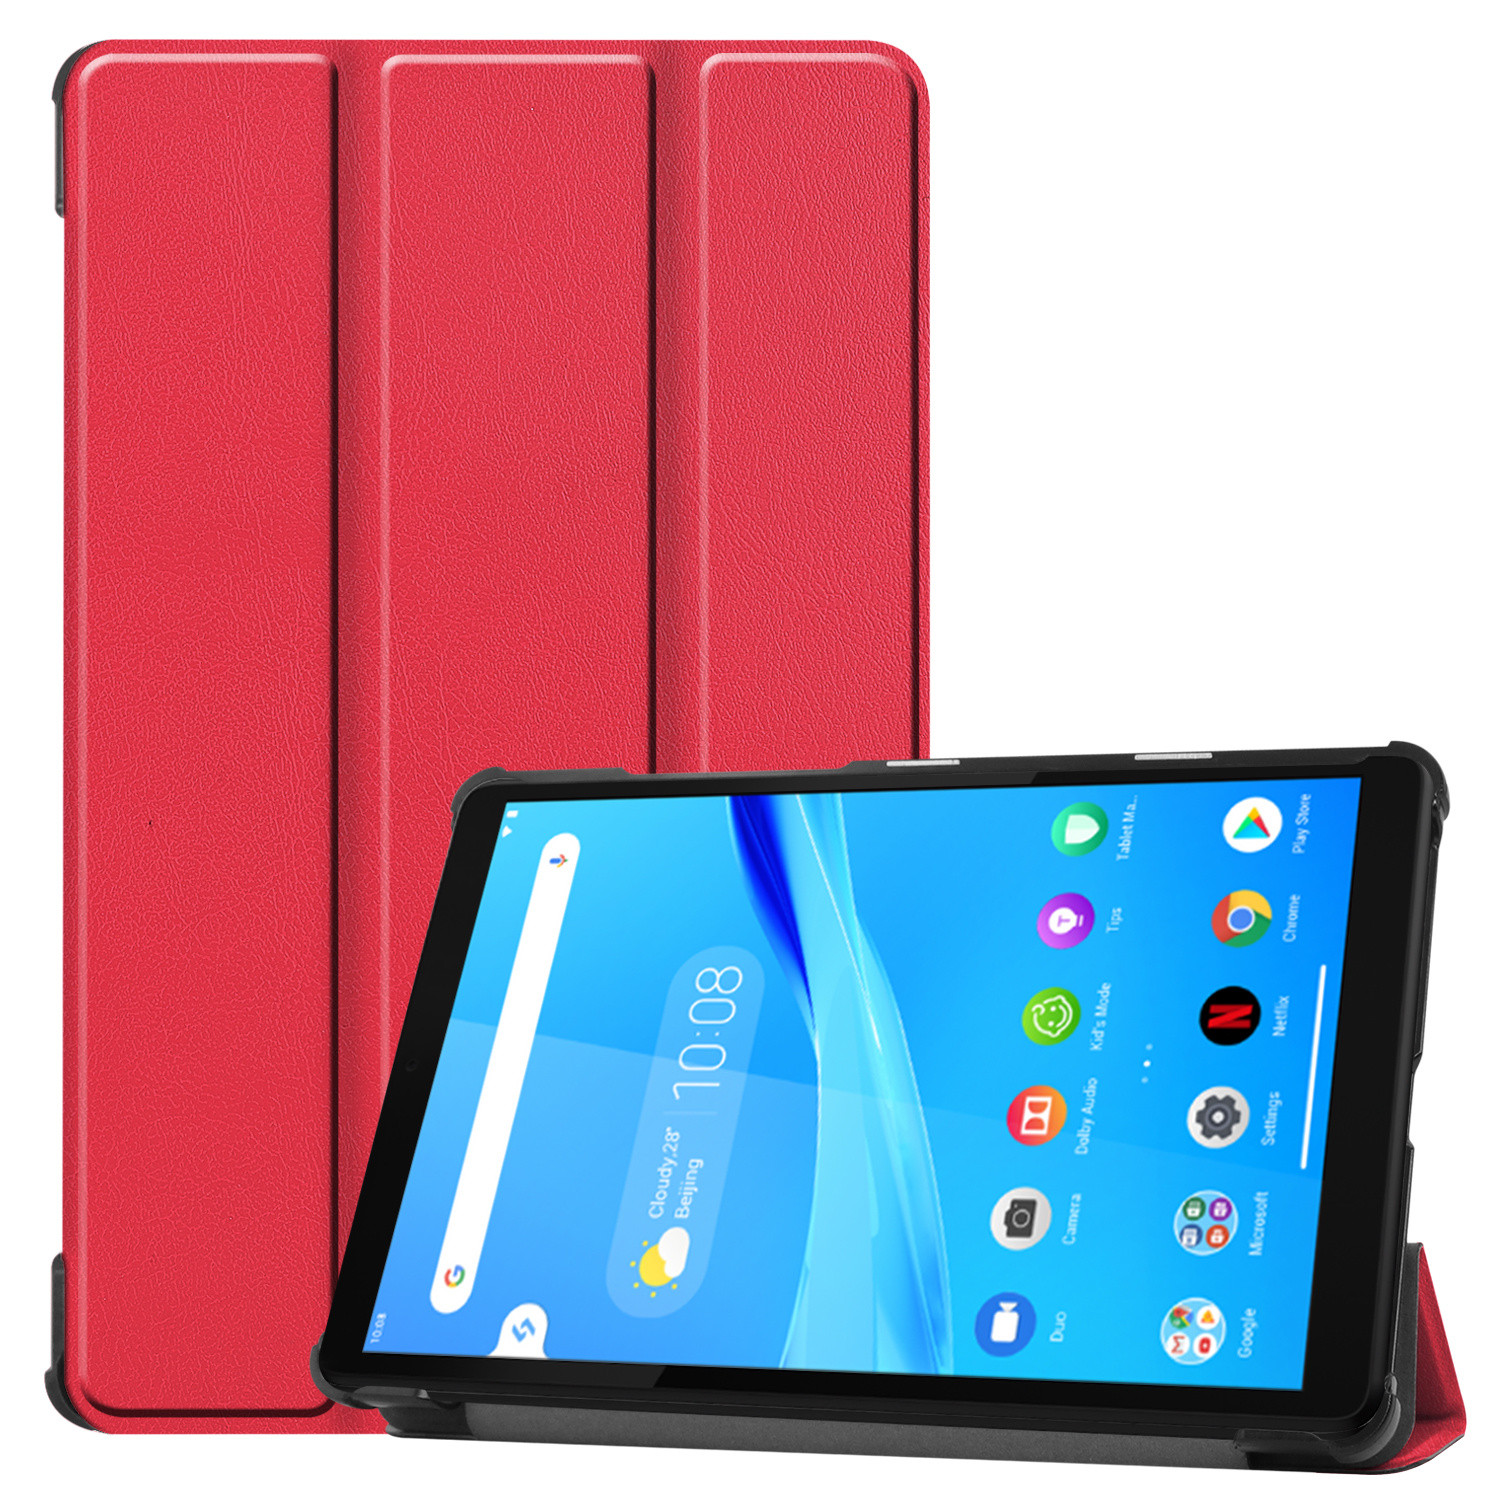 3-Vouw sleepcover hoes - Lenovo Tab M8 - Rood